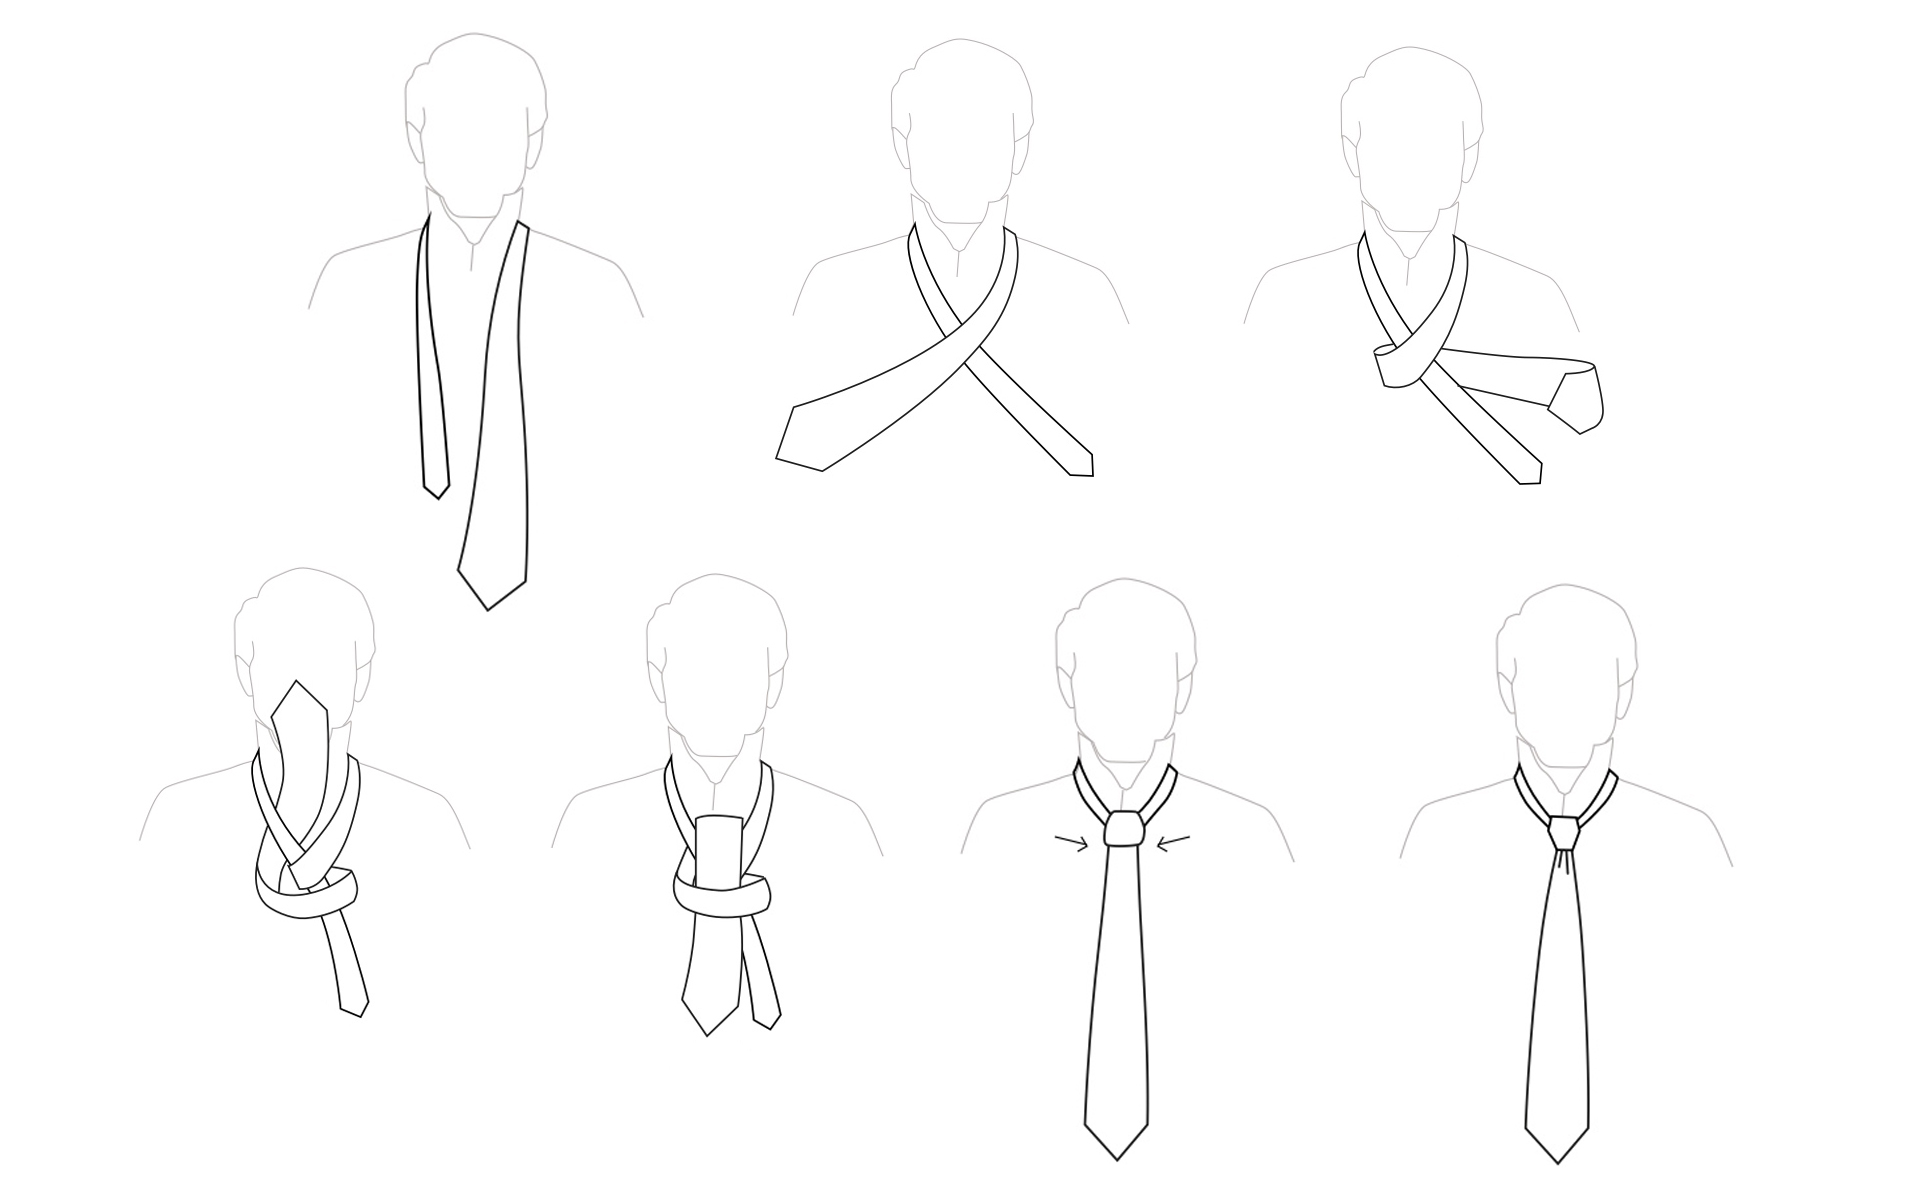 How To Draw A Tie